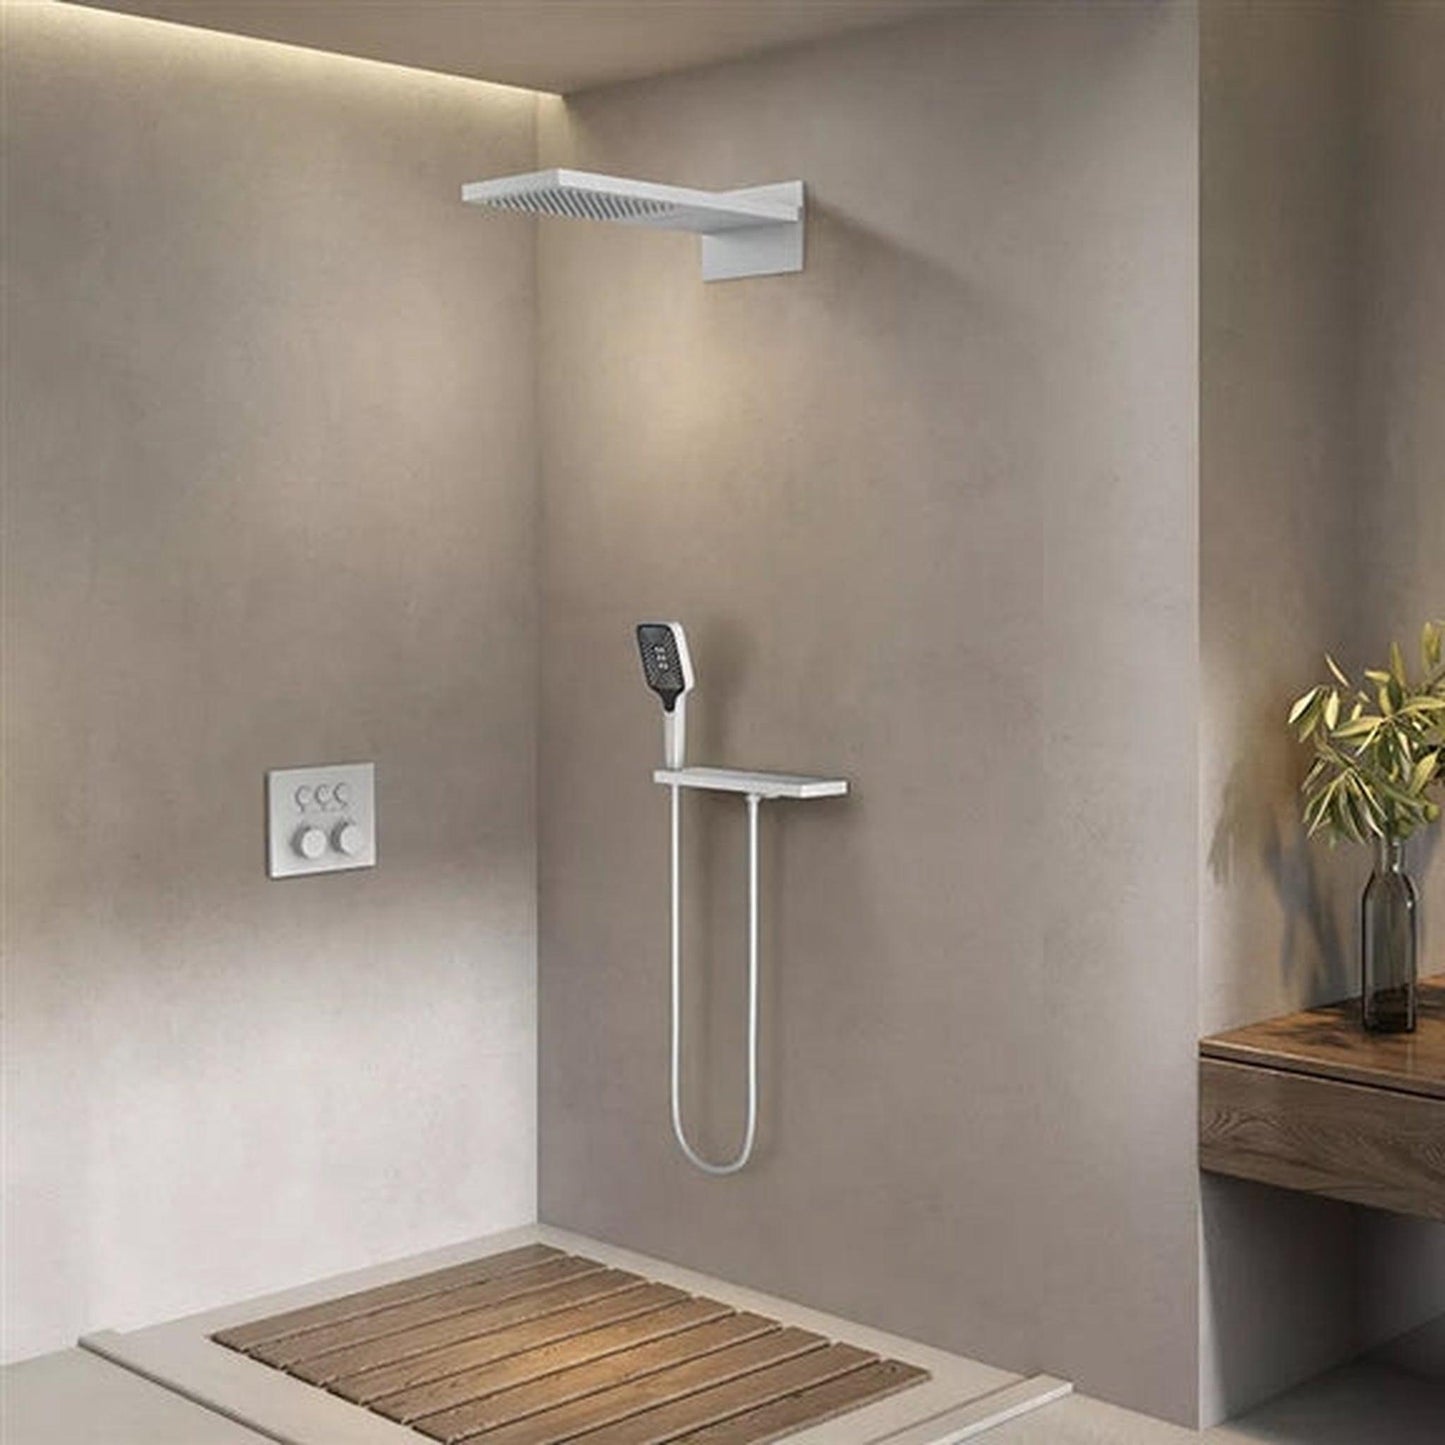 Fontana Latina Creative Luxury White Wall-Mounted Thermostatic Rainfall & Waterfall Shower System With Hand Shower